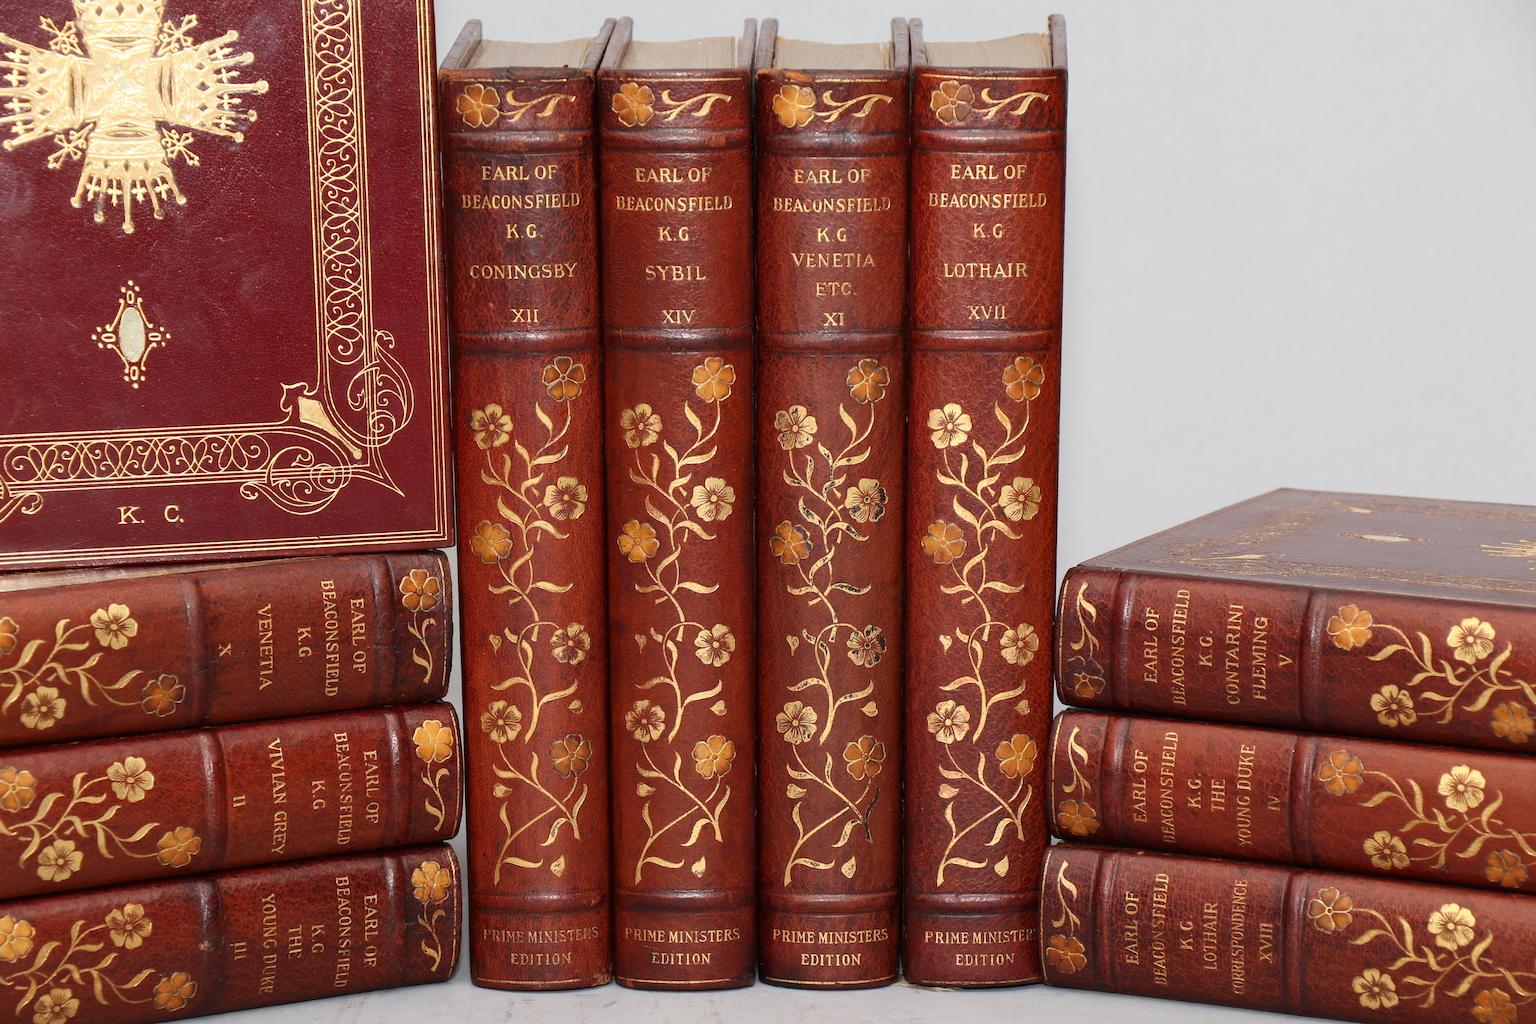 Leather bound. Twenty volumes. Octavo. Limited to 100 sets. Bound in full wine morocco doublers, with top edges gilt, raised bands, and ornate gilt tooling on spines & covers. Very good. Published in London by M. Walter Dunne in 1904.

All listed